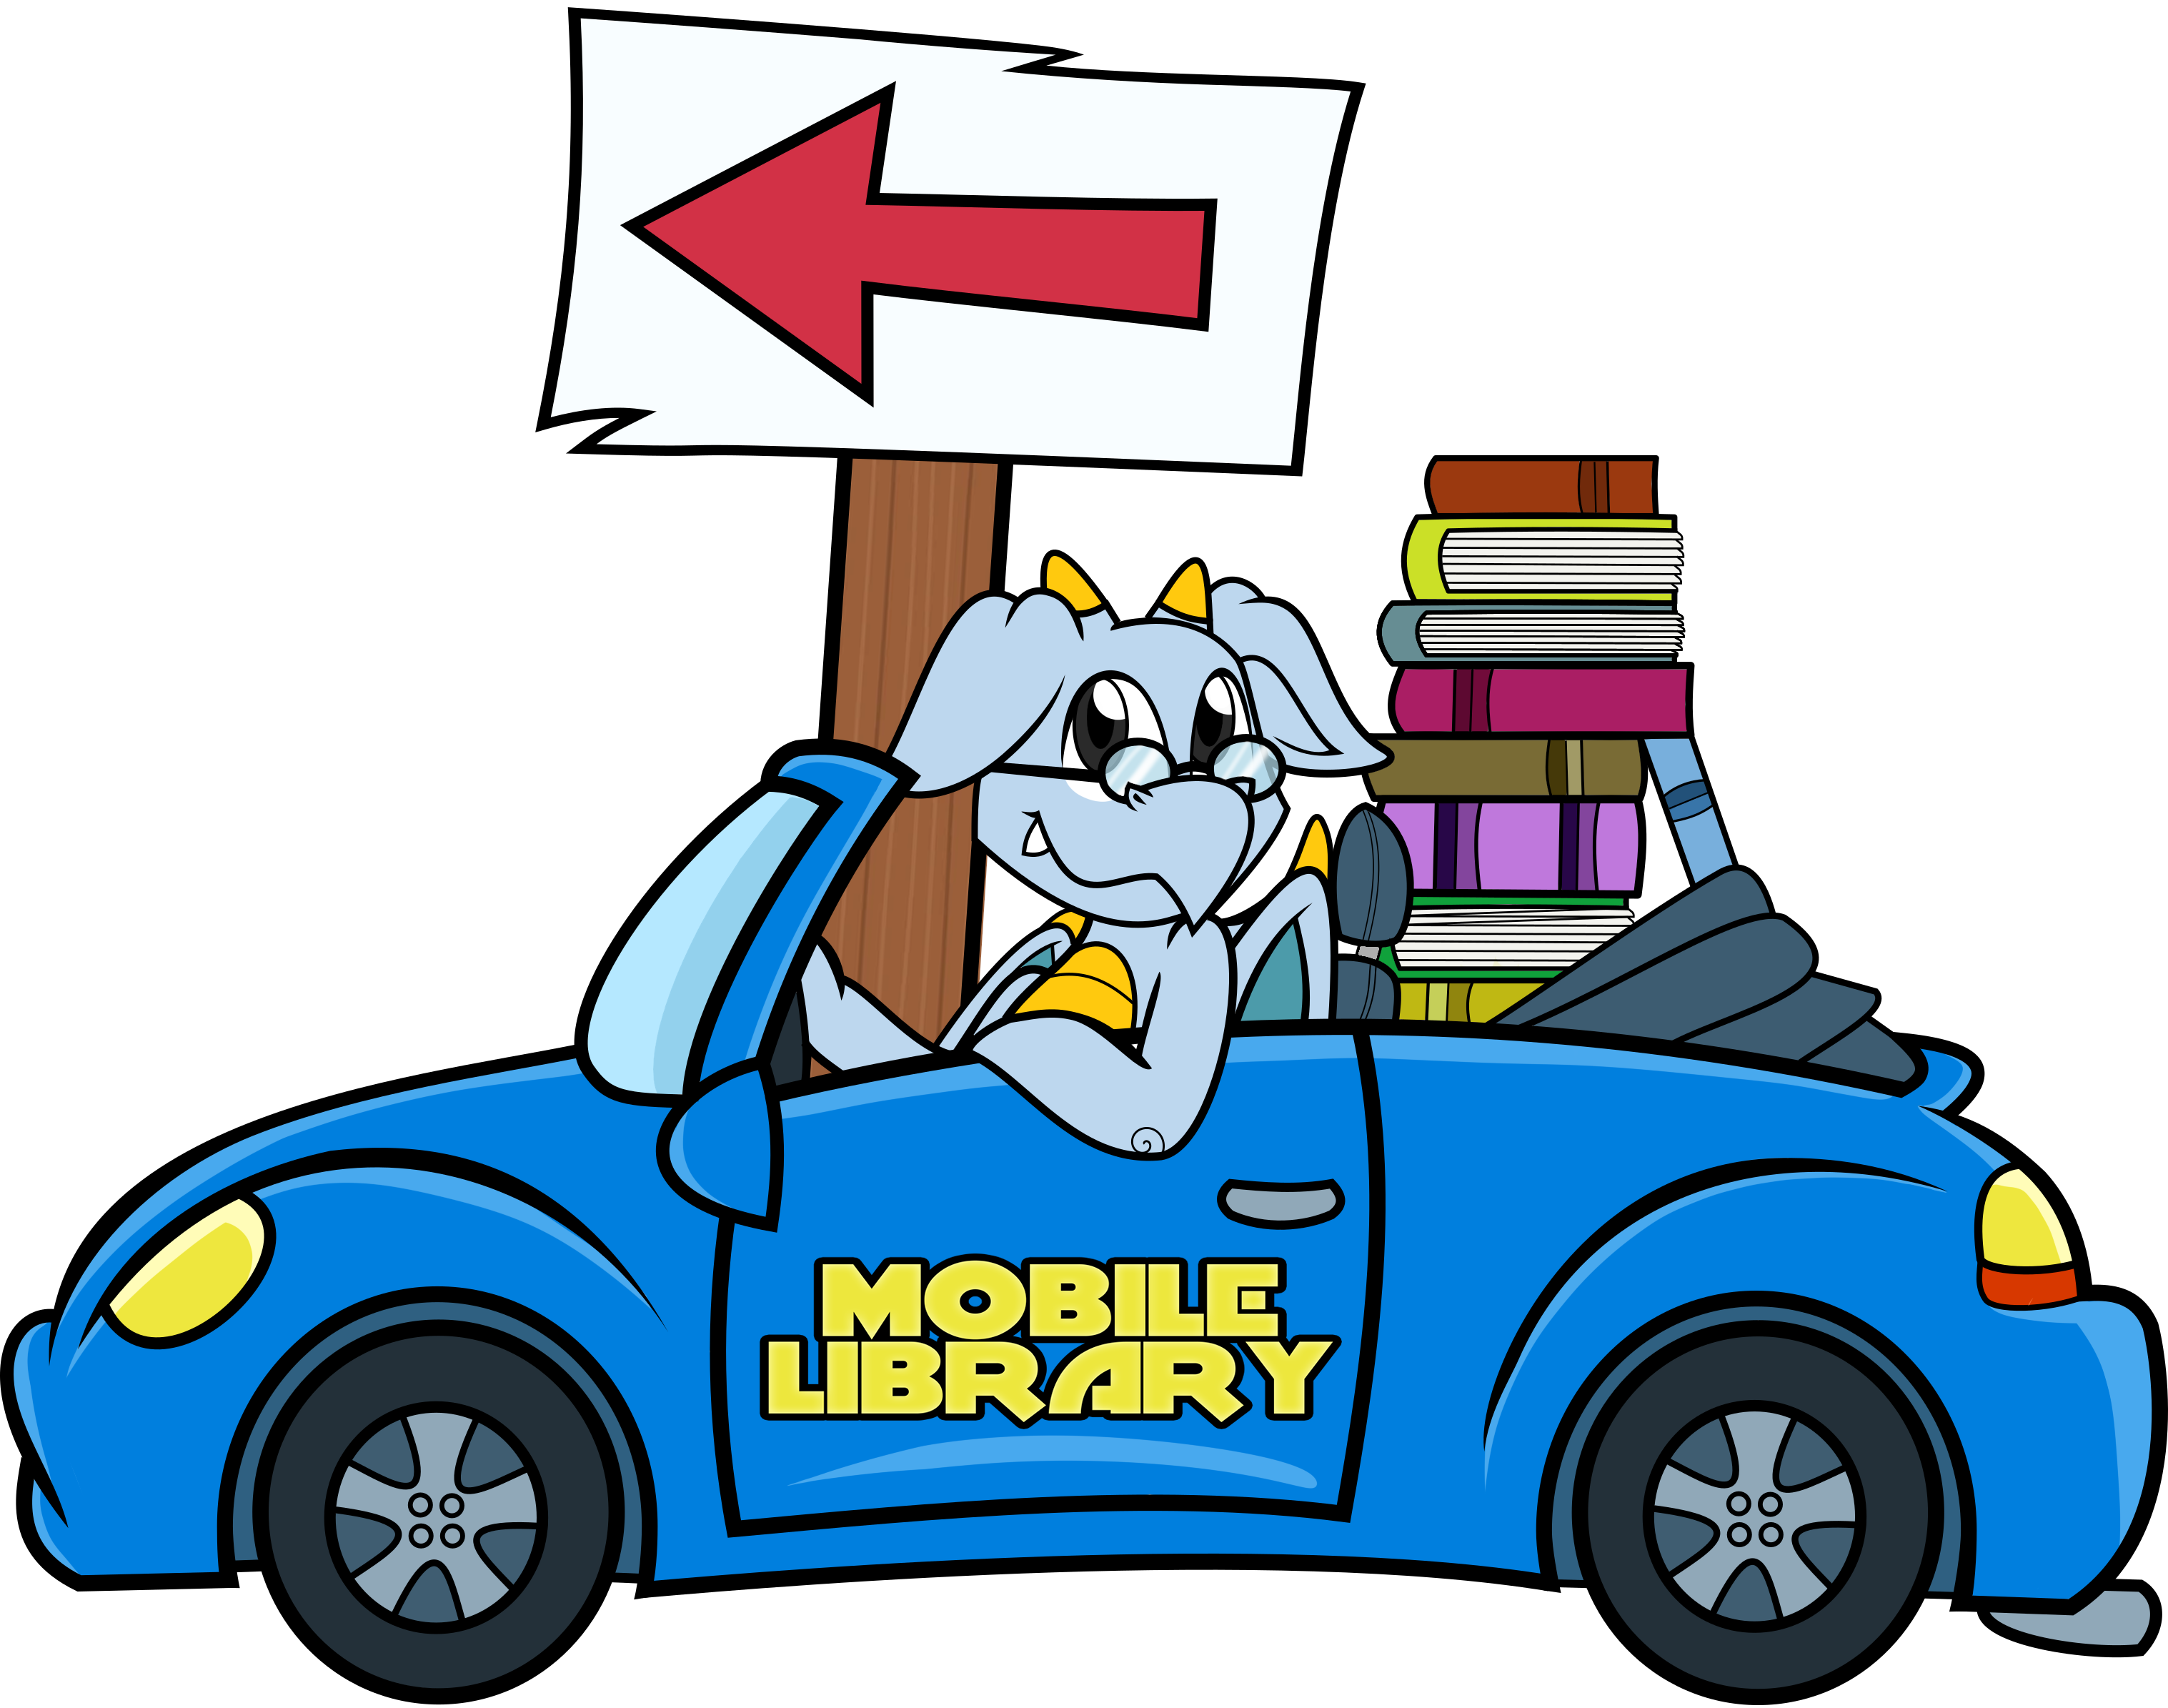 Mobile Library Schedule Coming Soon!